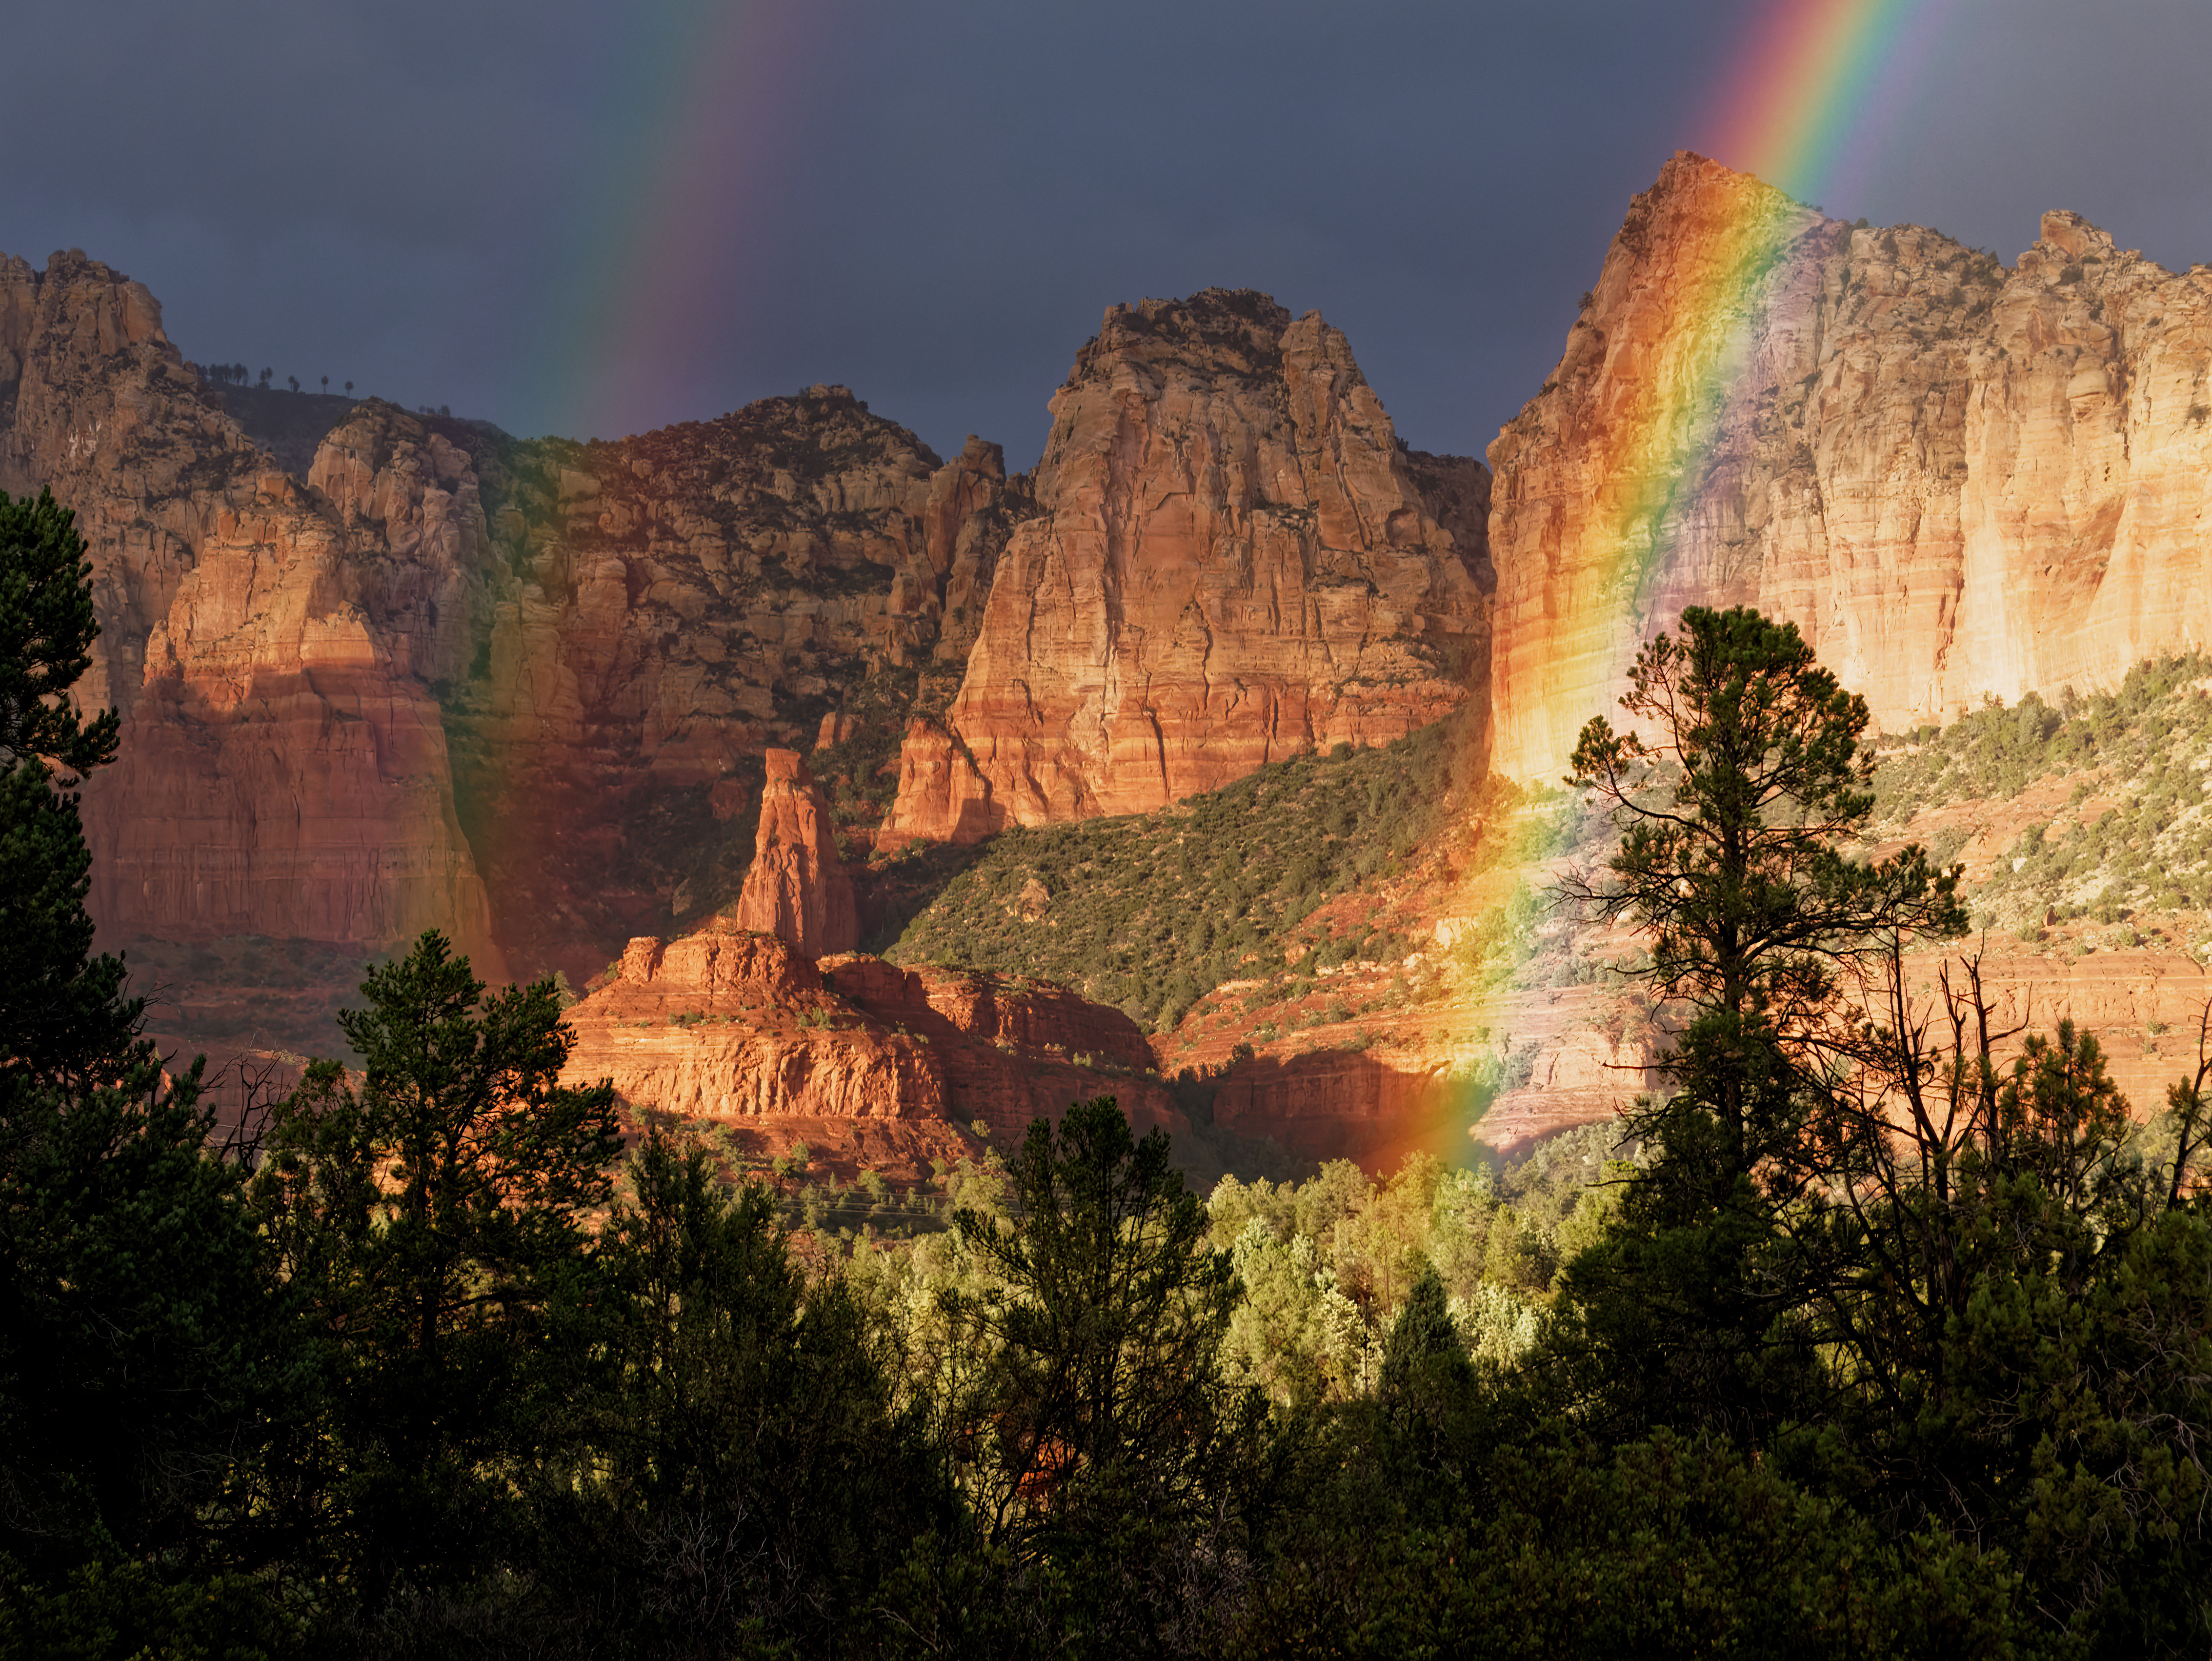 Photo by Stephen Kalinowski  |  Double rainbows after a storm in Red Rock Country